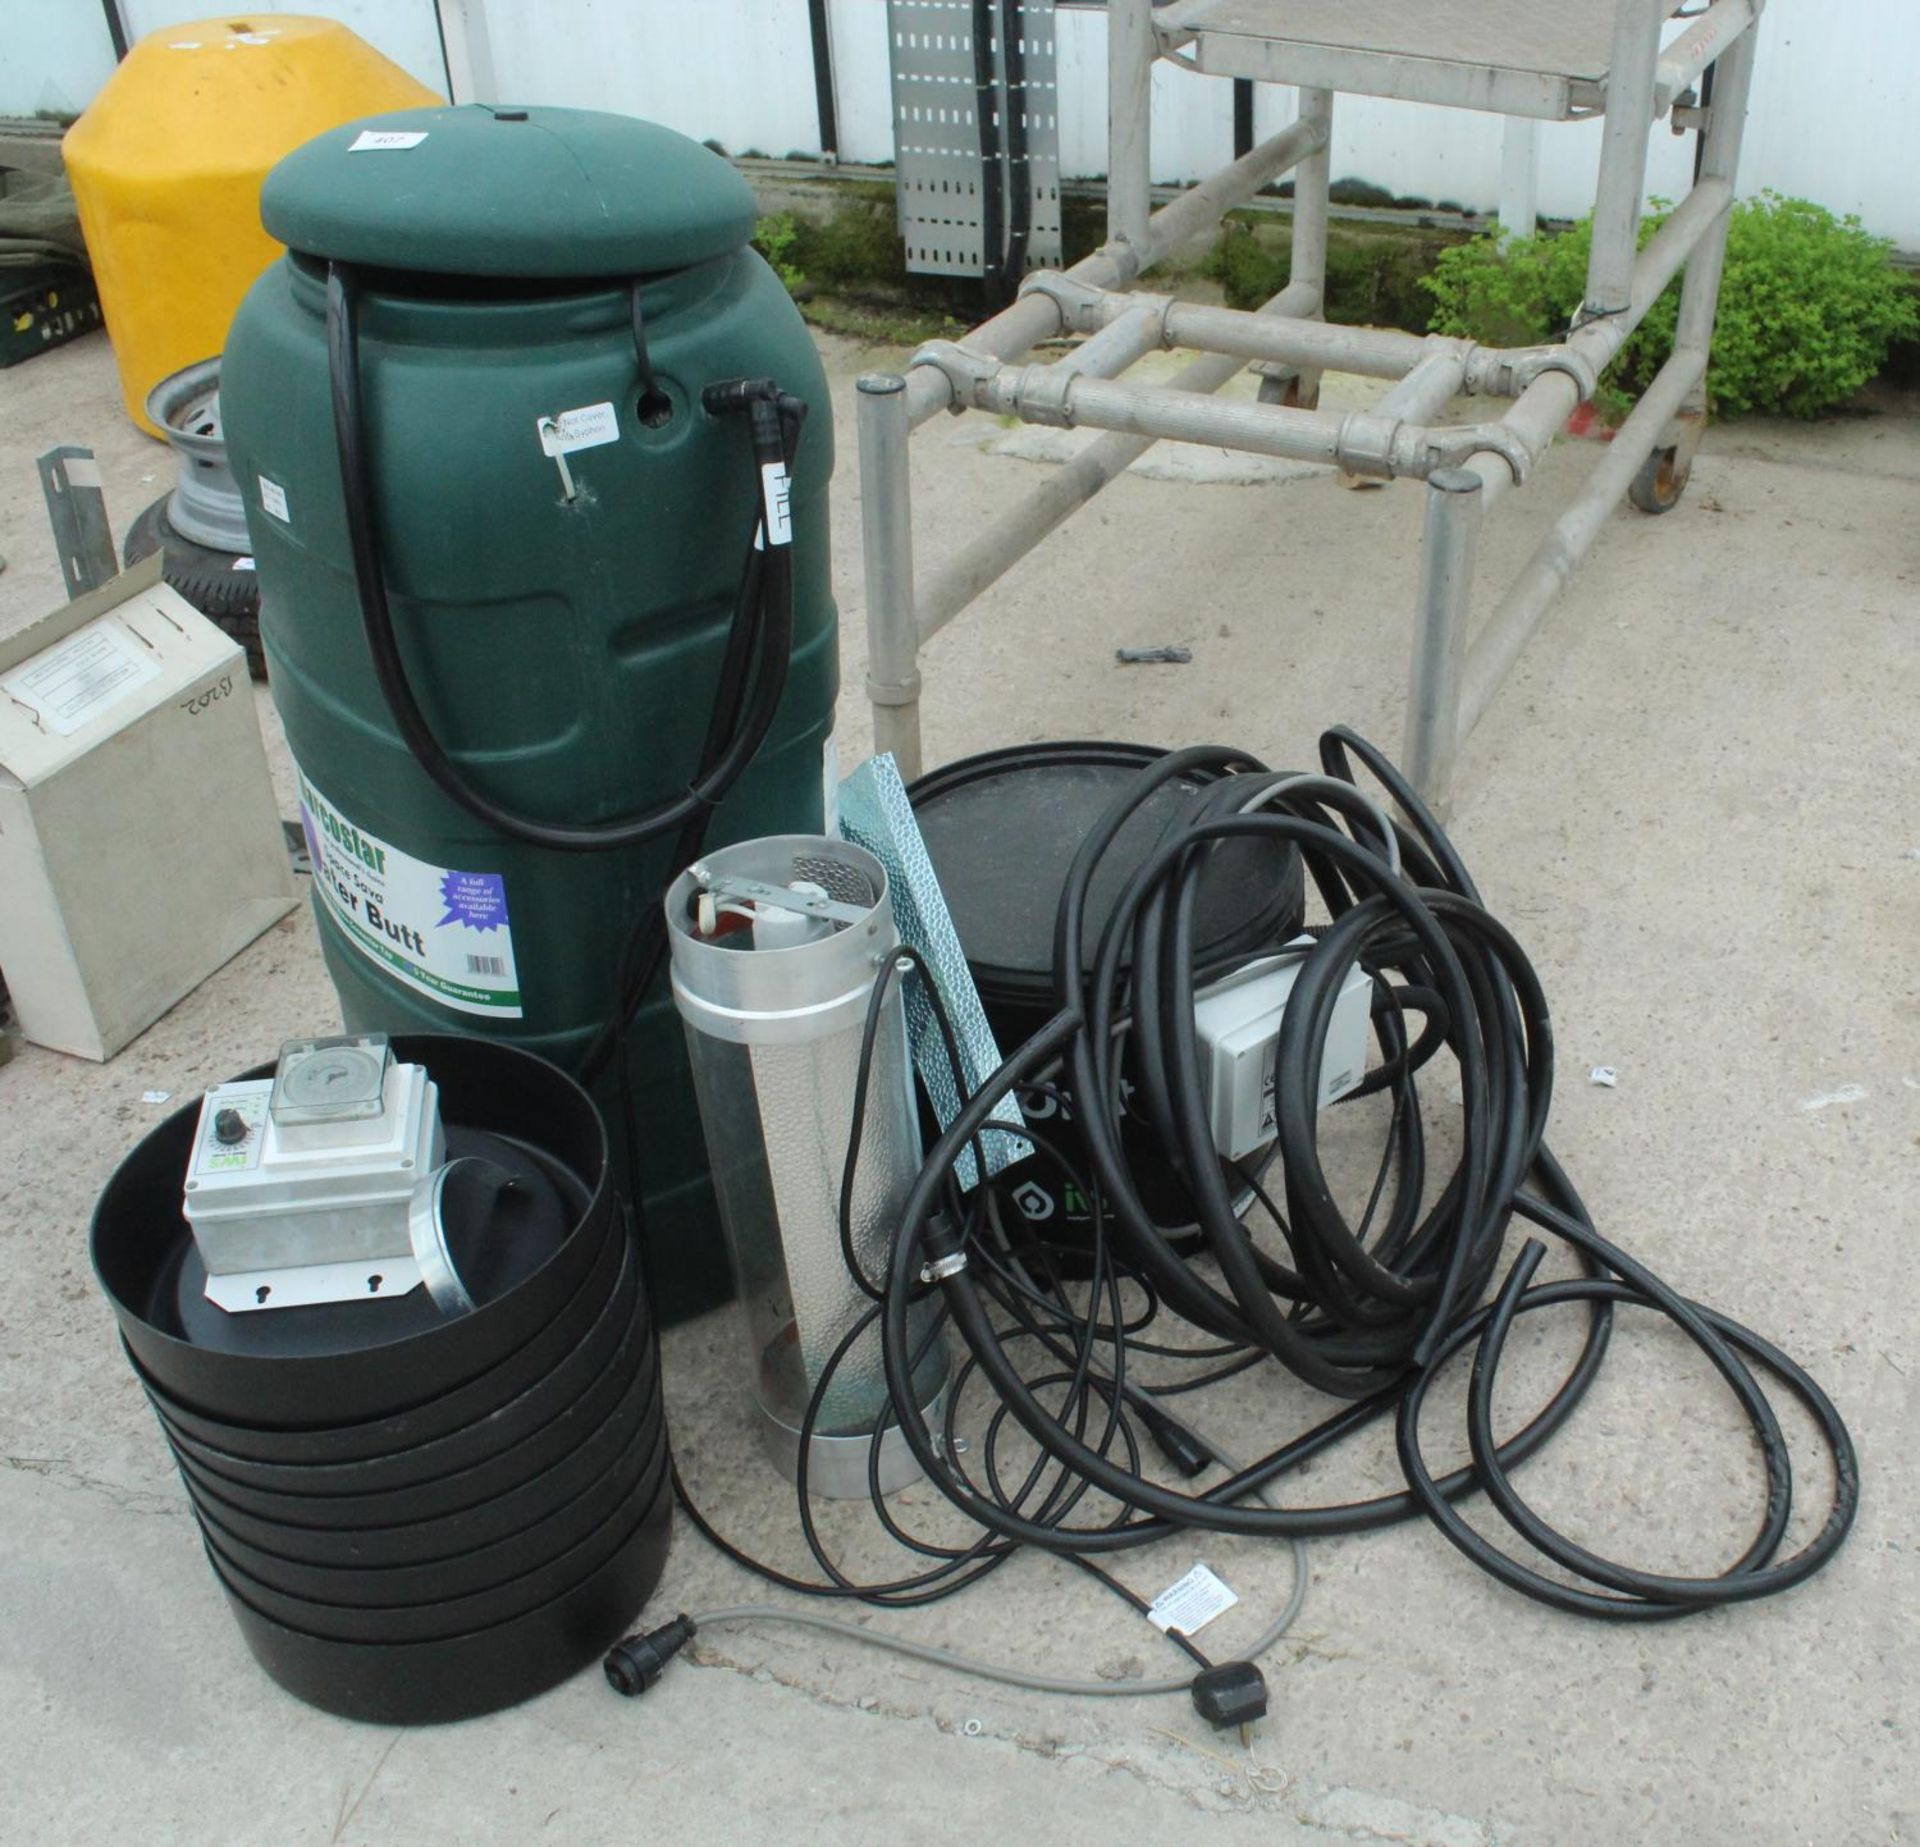 COMPLETE HYDROPONIC FLOOD AND DRAIN SYSTEM, TIMER, PUMP AND COOL TUBE LAMP INCLUDED ALL WORKING (